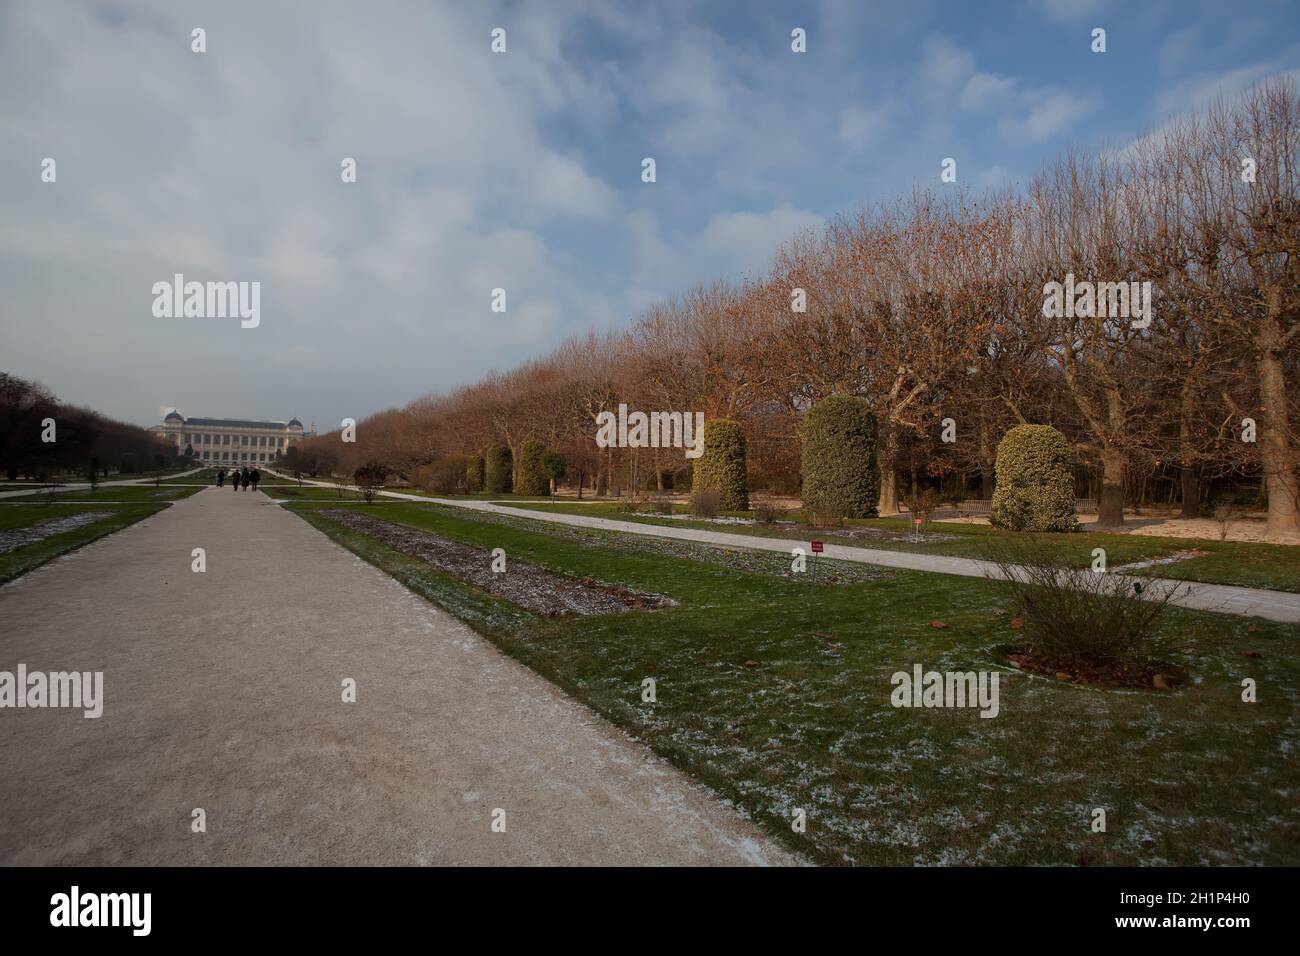 Luxembourg Jardin Des Plantes Paris High Resolution Stock Photography and  Images - Alamy